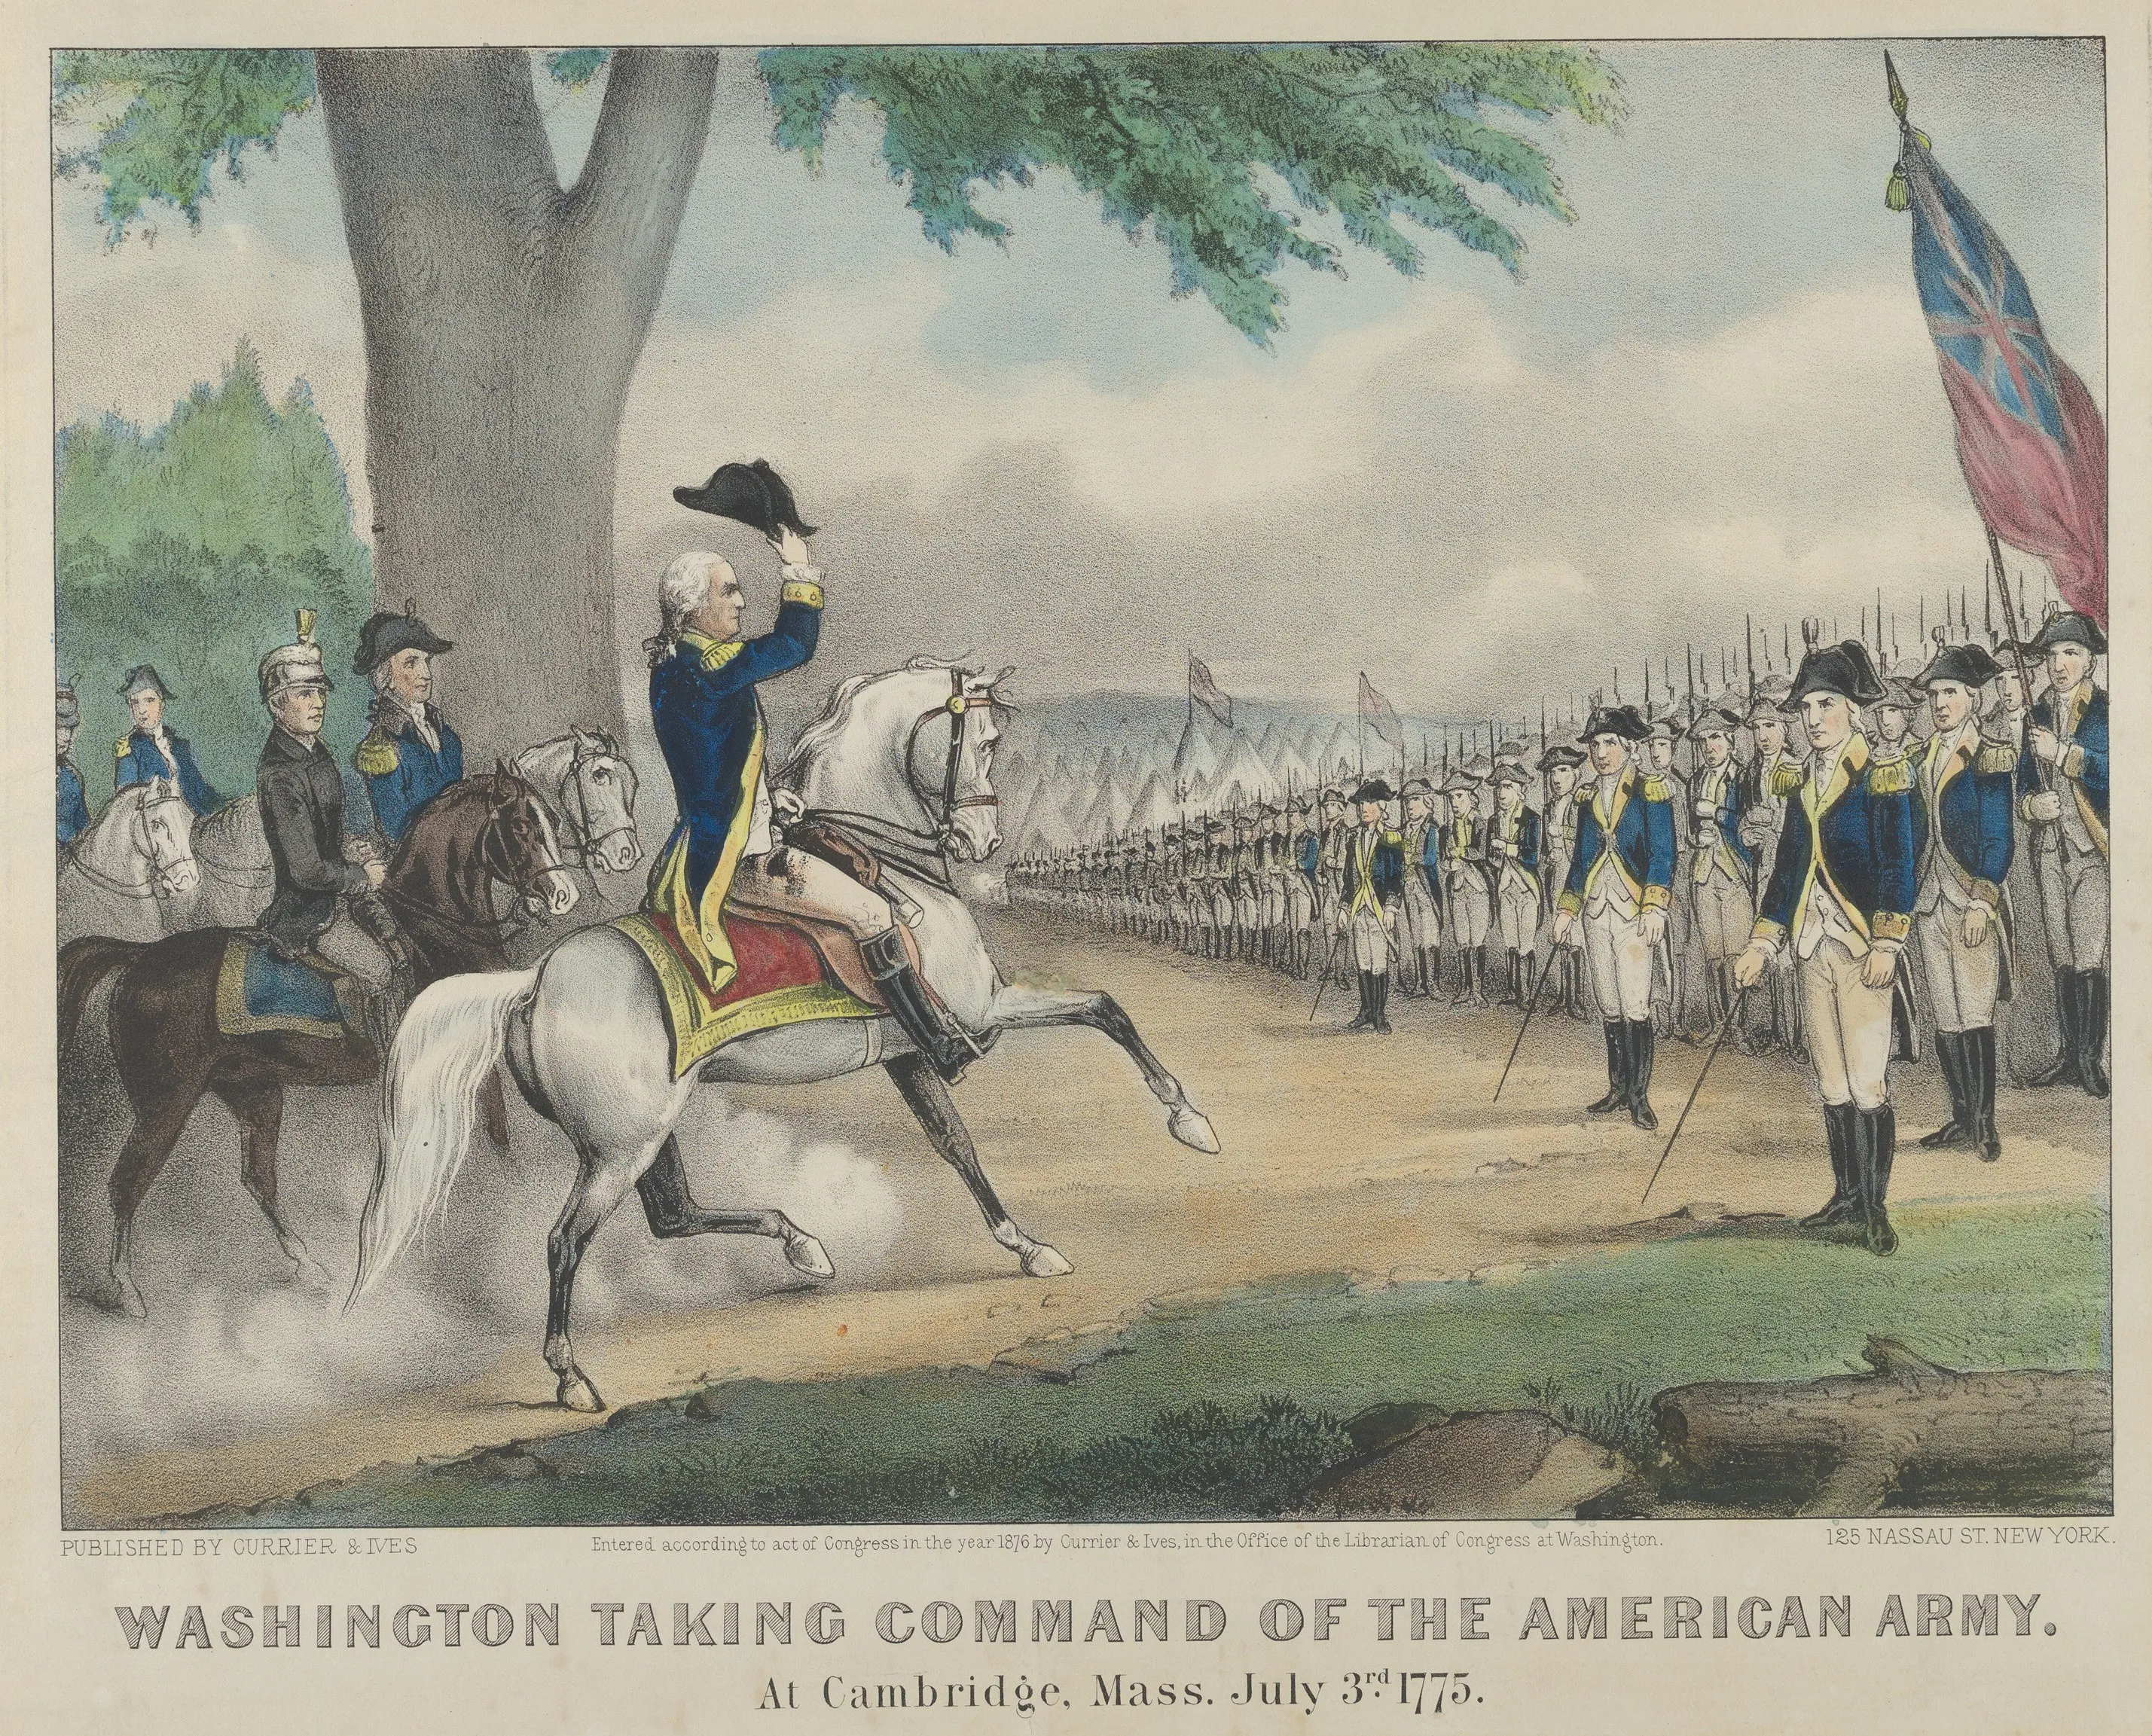 An artist's rendition of Washington taking command of the American Army in Cambridge, Mass.